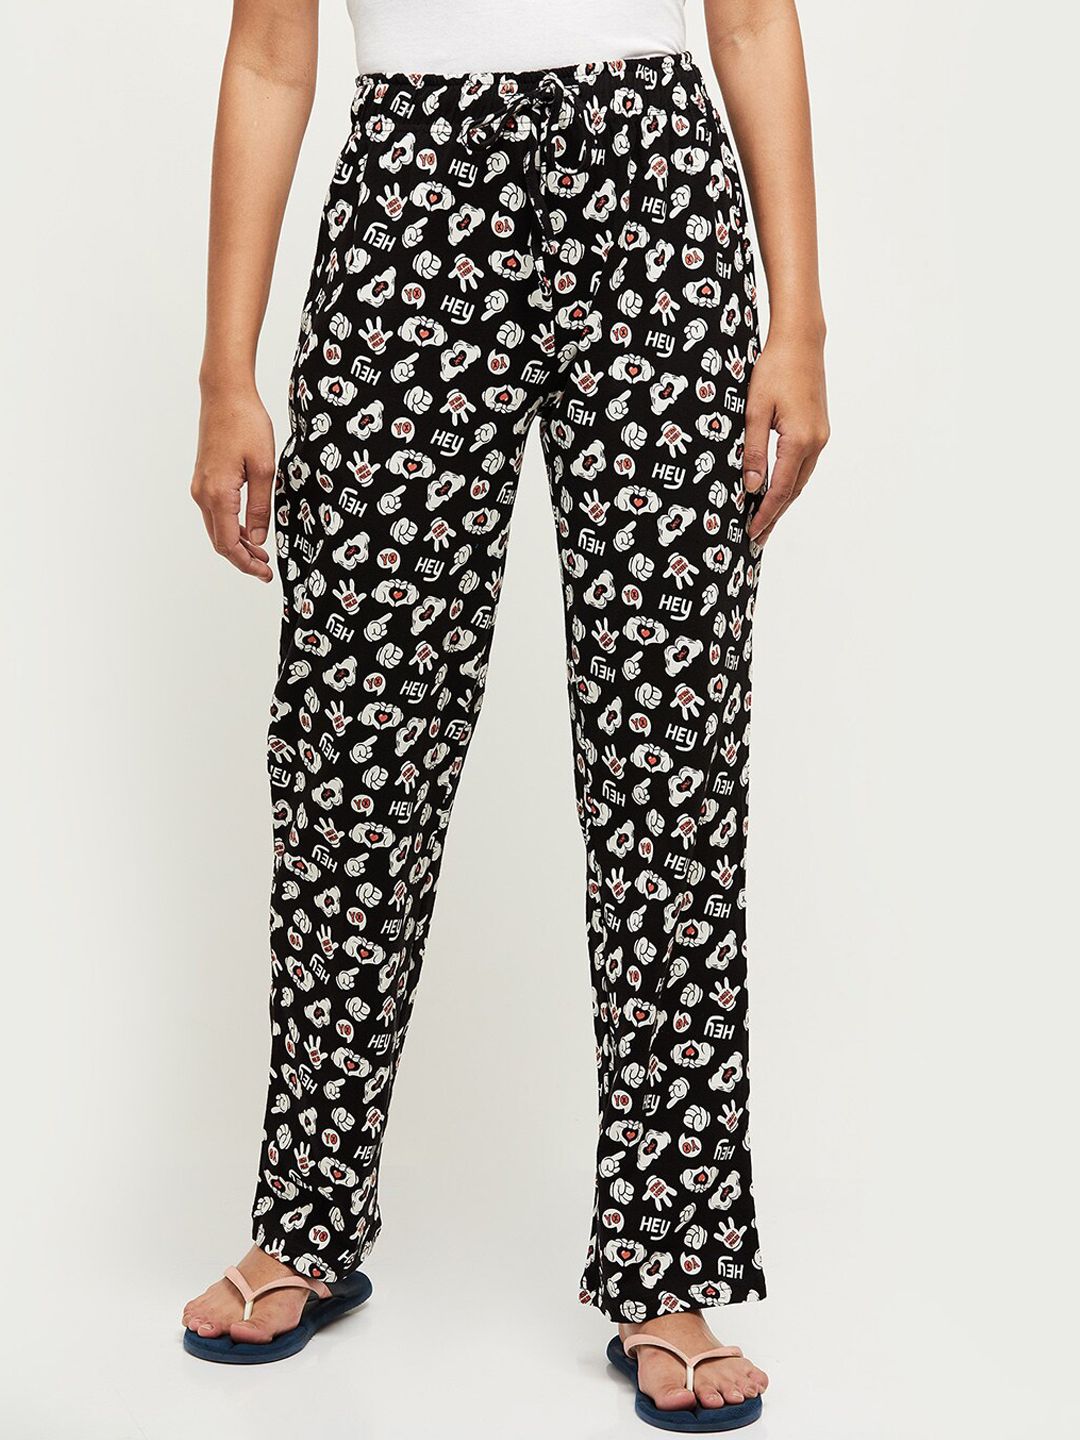 max Women Black Floral Print Cotton Lounge Pants Price in India